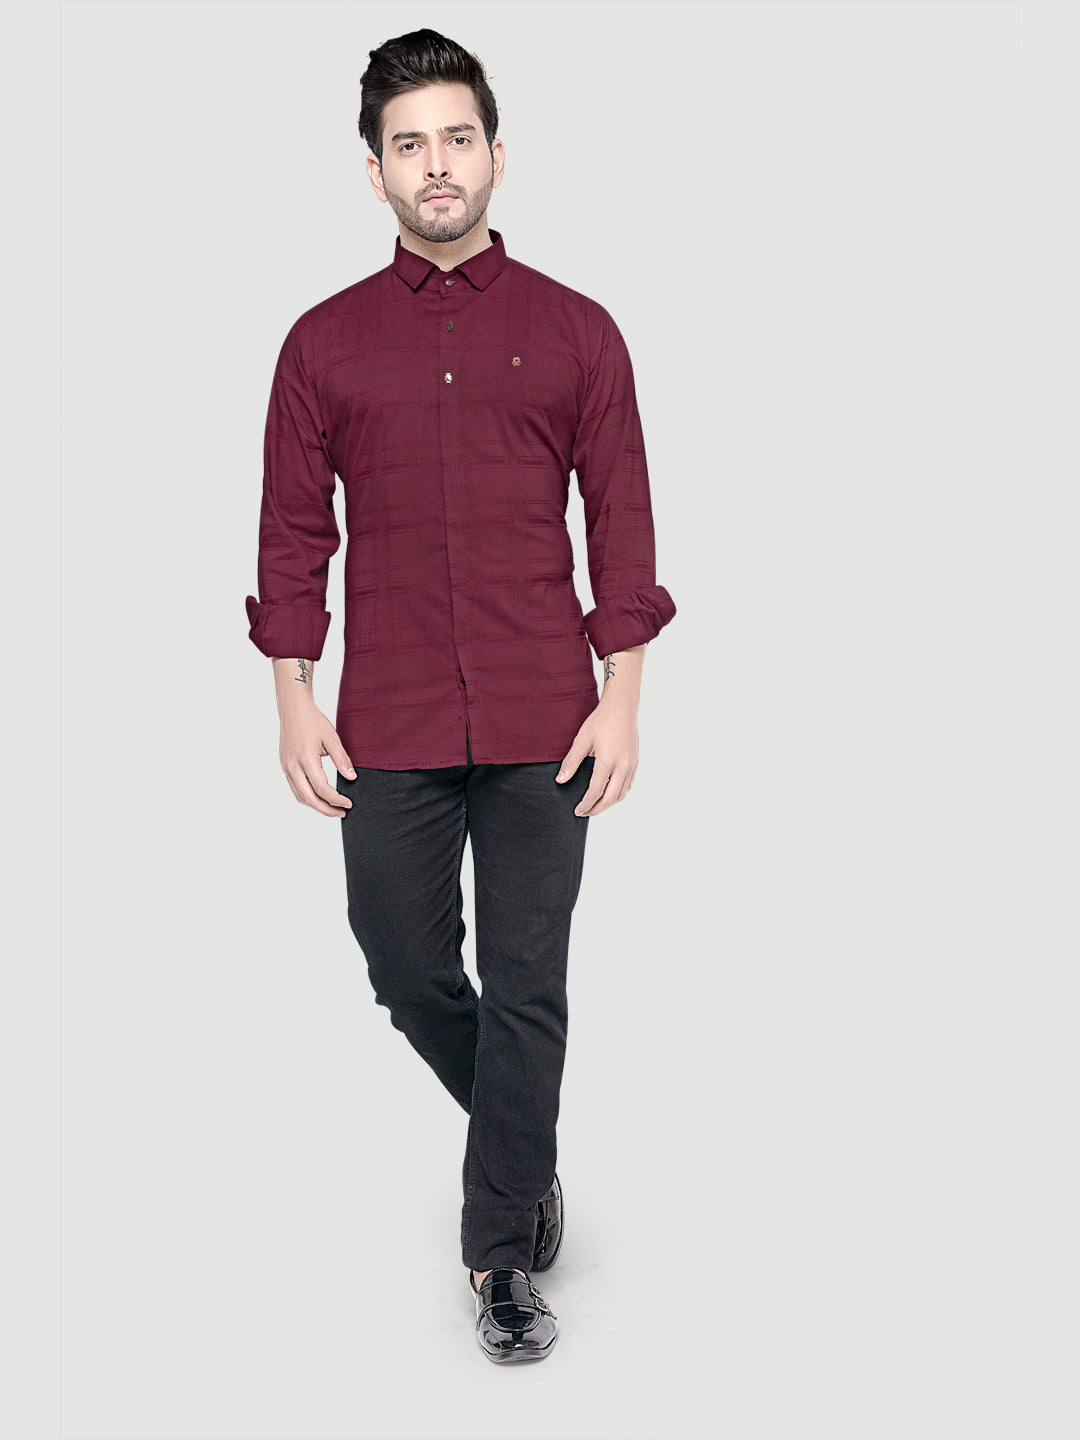 Black and White Shirts Designer Shirts with Collar Accessories- Maroon